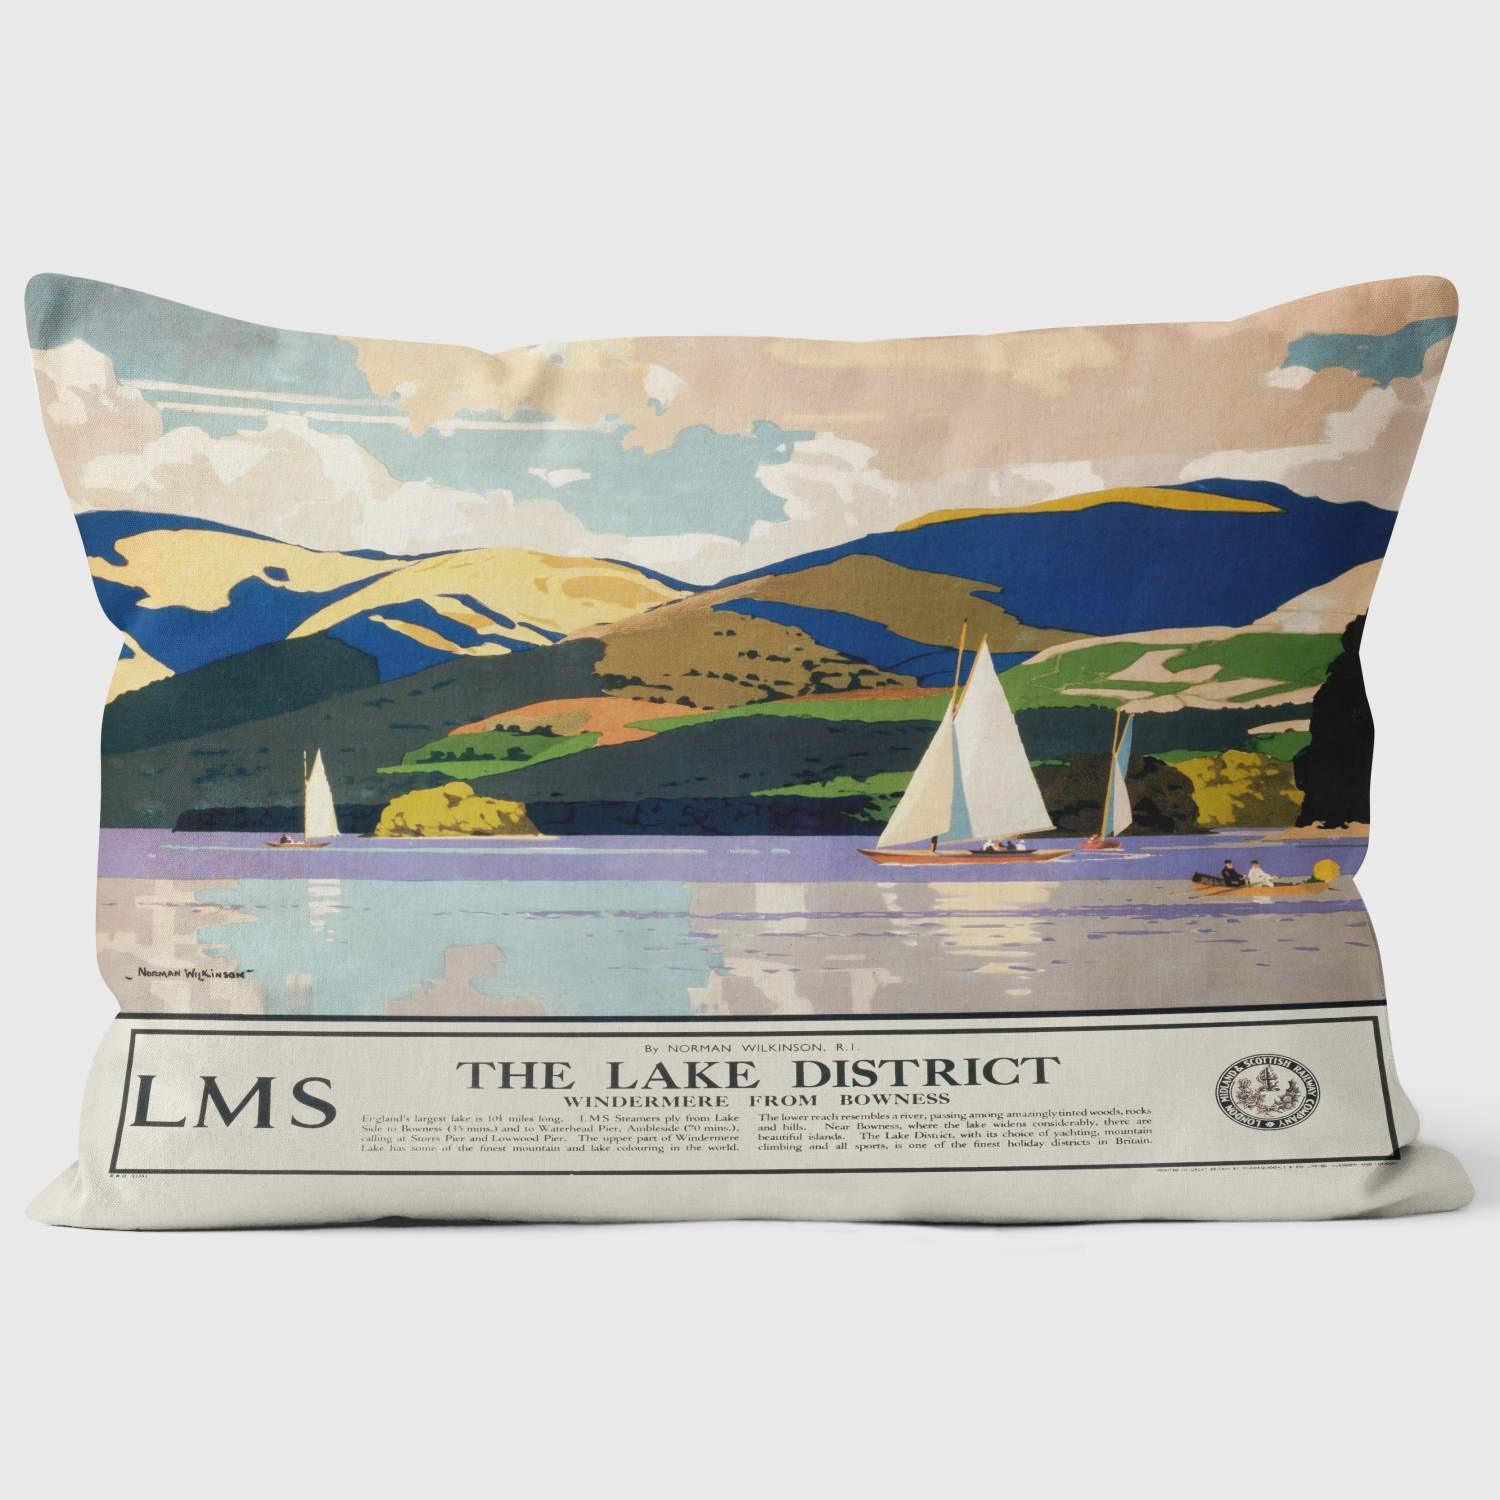 The Lake District - Windermere From Bowness LMS 1923 -1947 - National Railway Museum Cushion - Handmade Cushions UK - WeLoveCushions